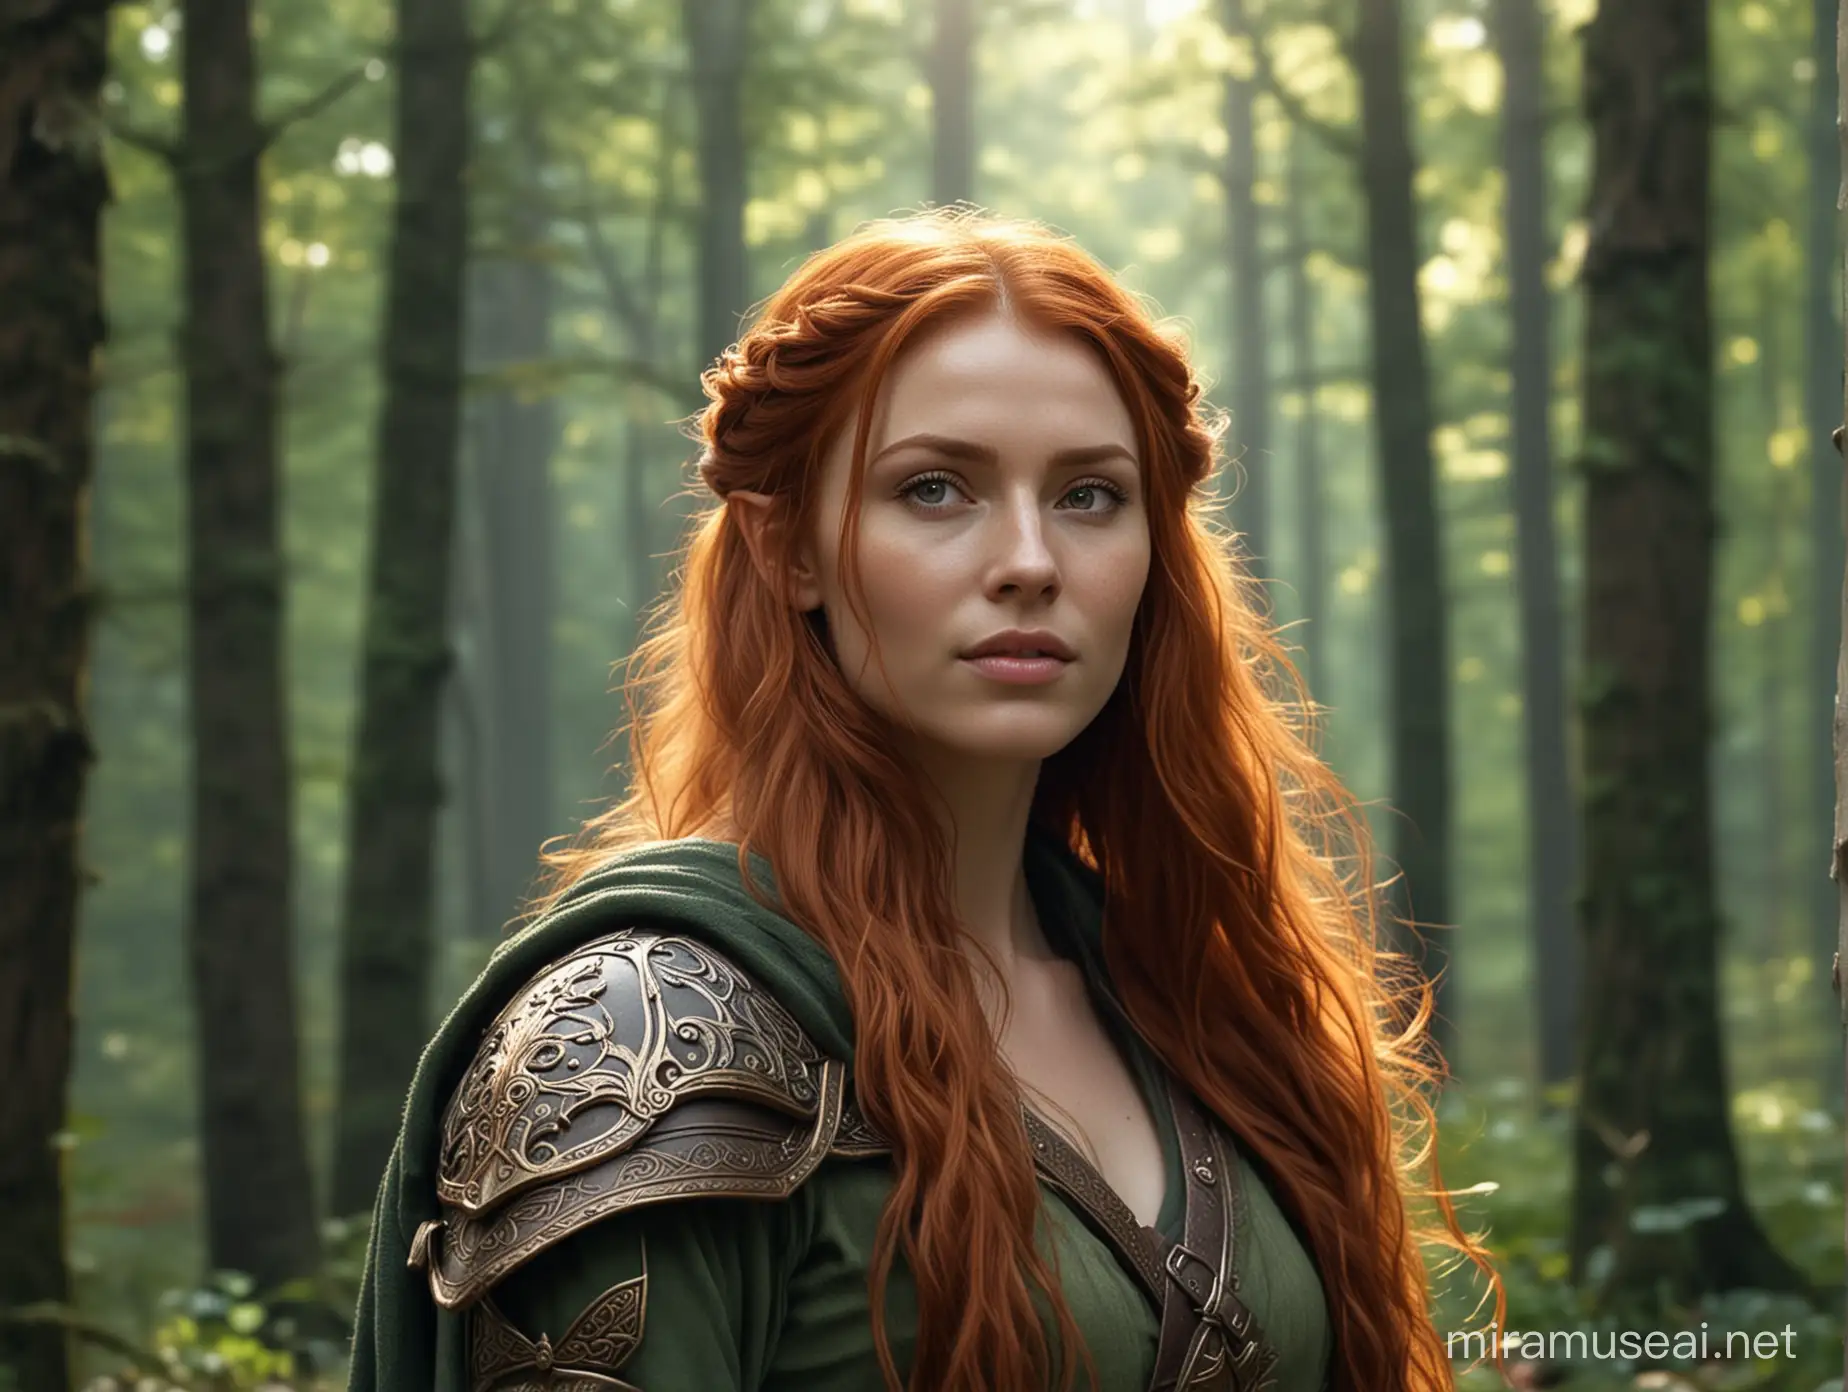 Create a beautiful and ultra-realistic image of a beautiful redhead with long and beautiful hair, dressed as a warrior, representing an elf woman. Her gaze is penetrating and enigmatic. She's in a forest. Show off the richness of detail in 8k. She has the robes like a warrior, from head to toe. She smiles, mockingly, with her head held high, bravely.